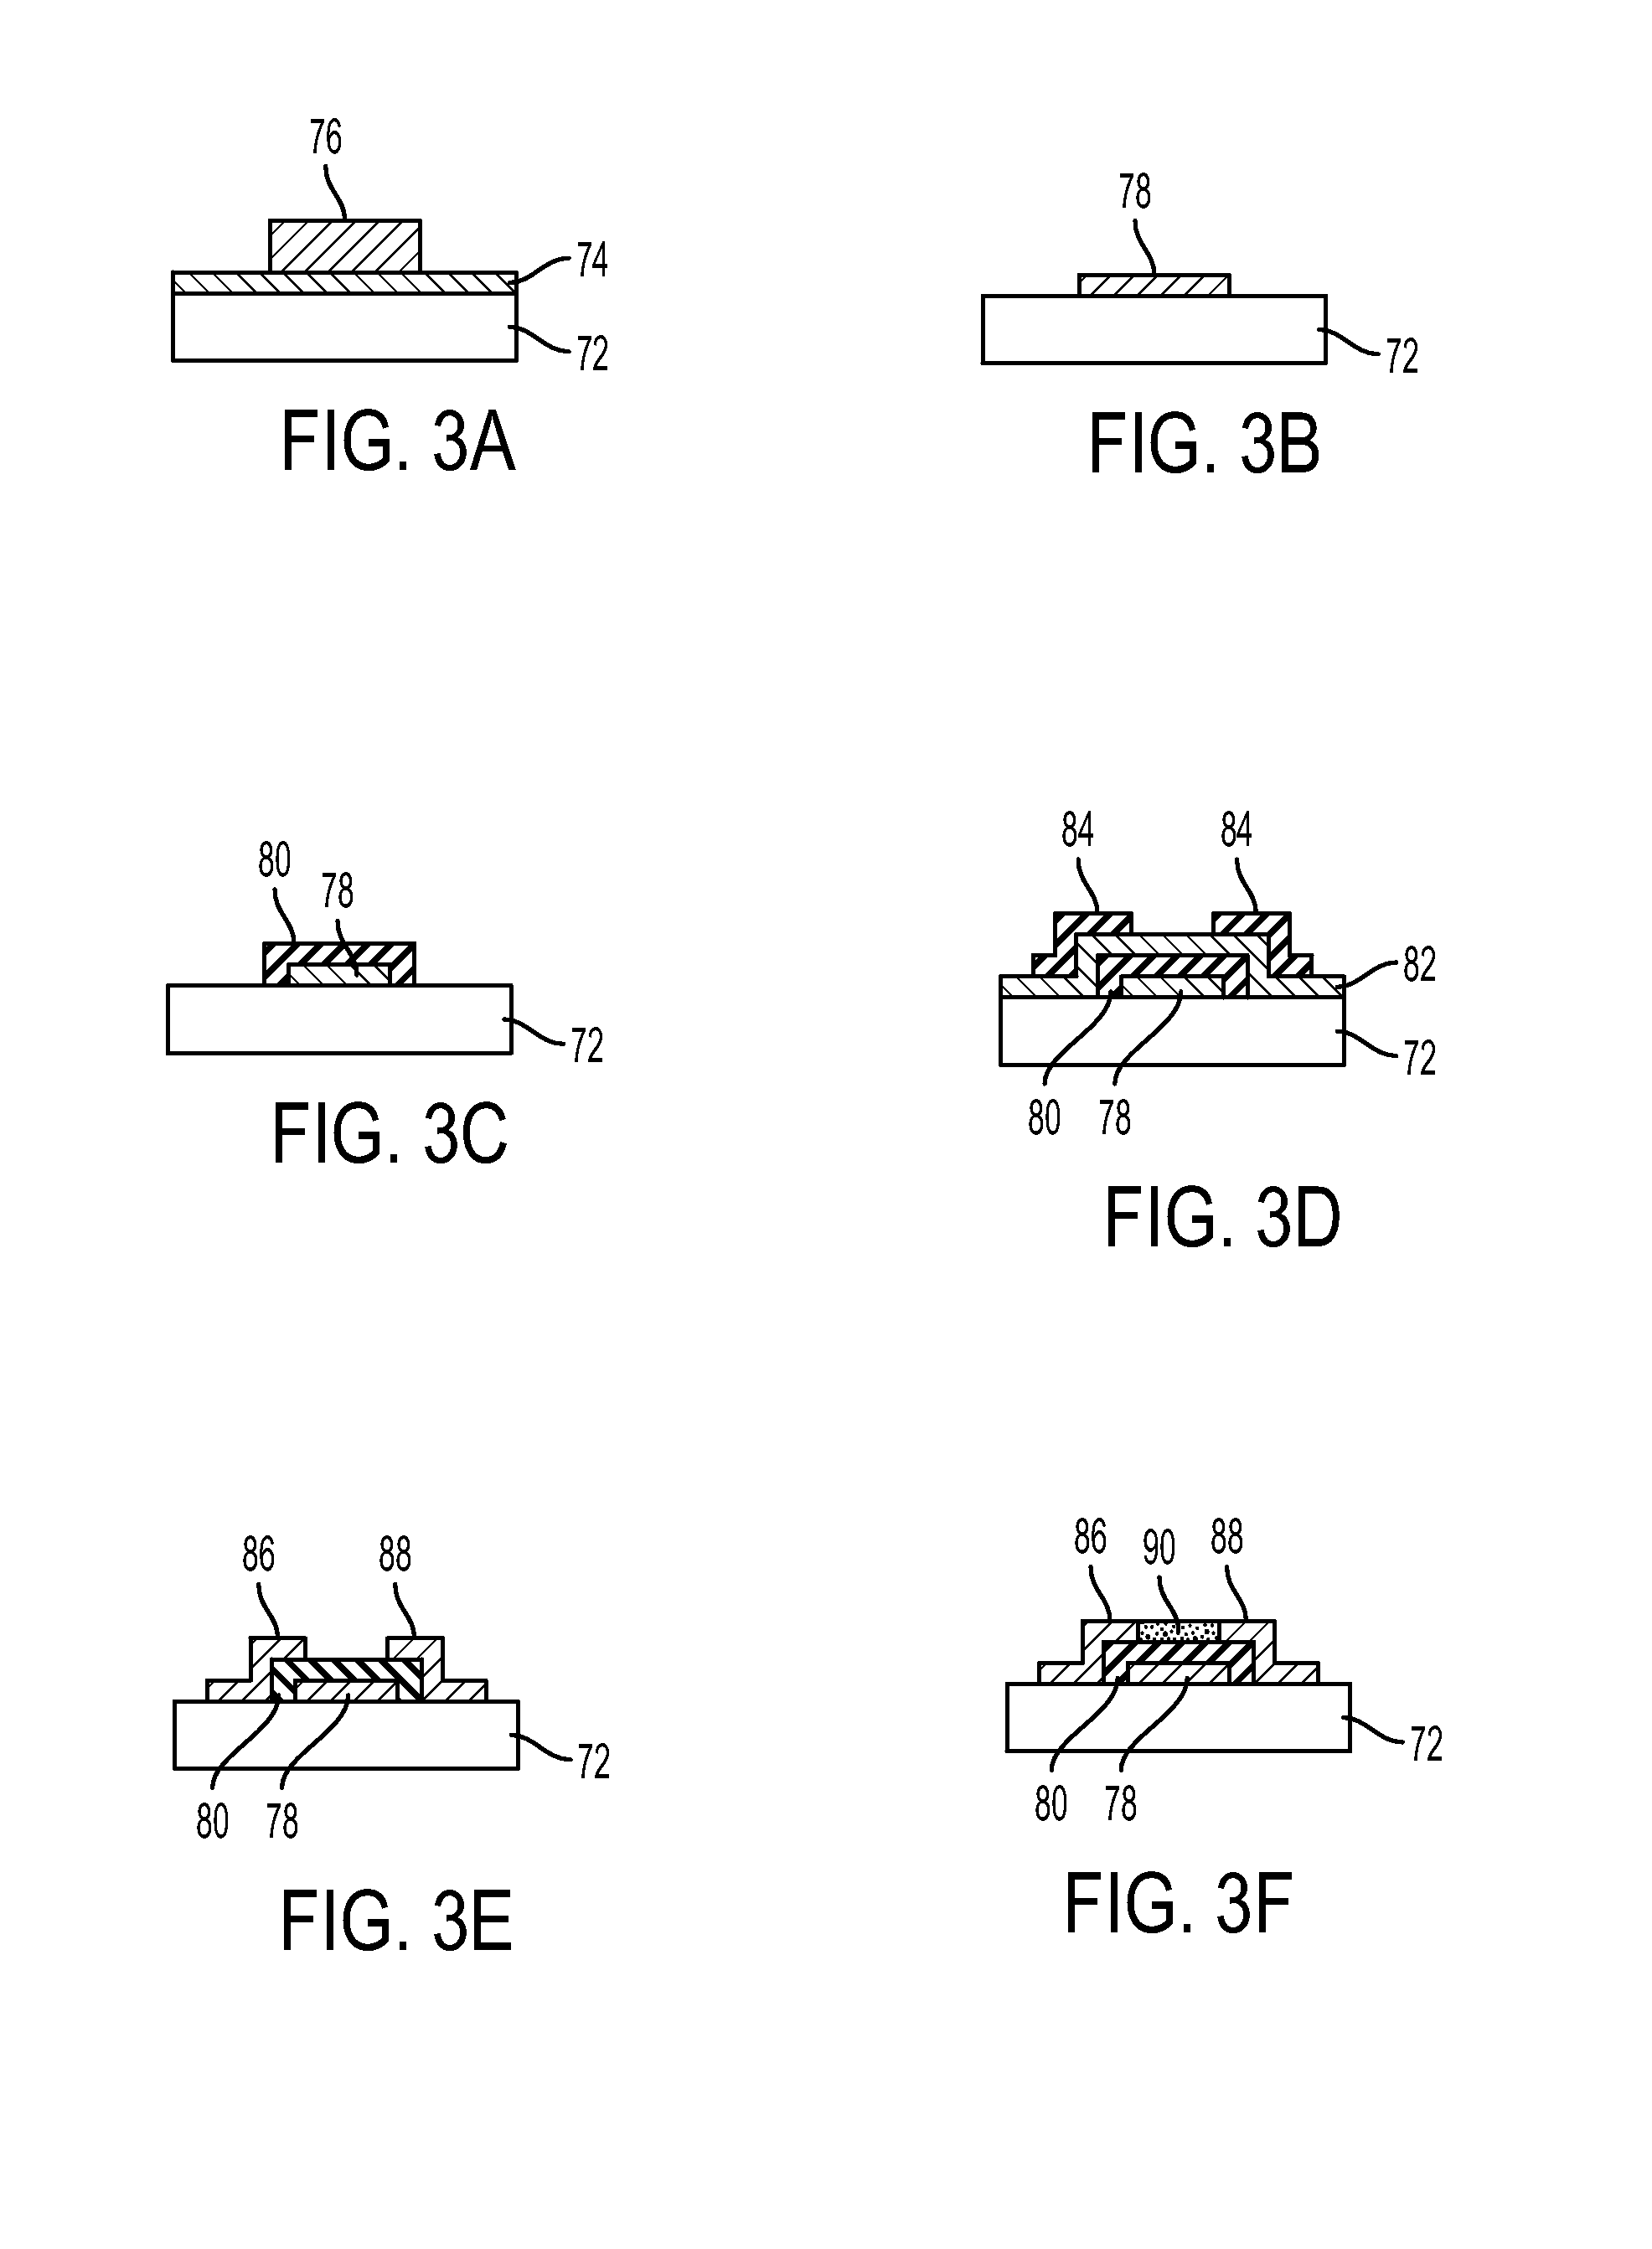 Transistor Device Formed on a Flexible Substrate Including Anodized Gate Dielectric